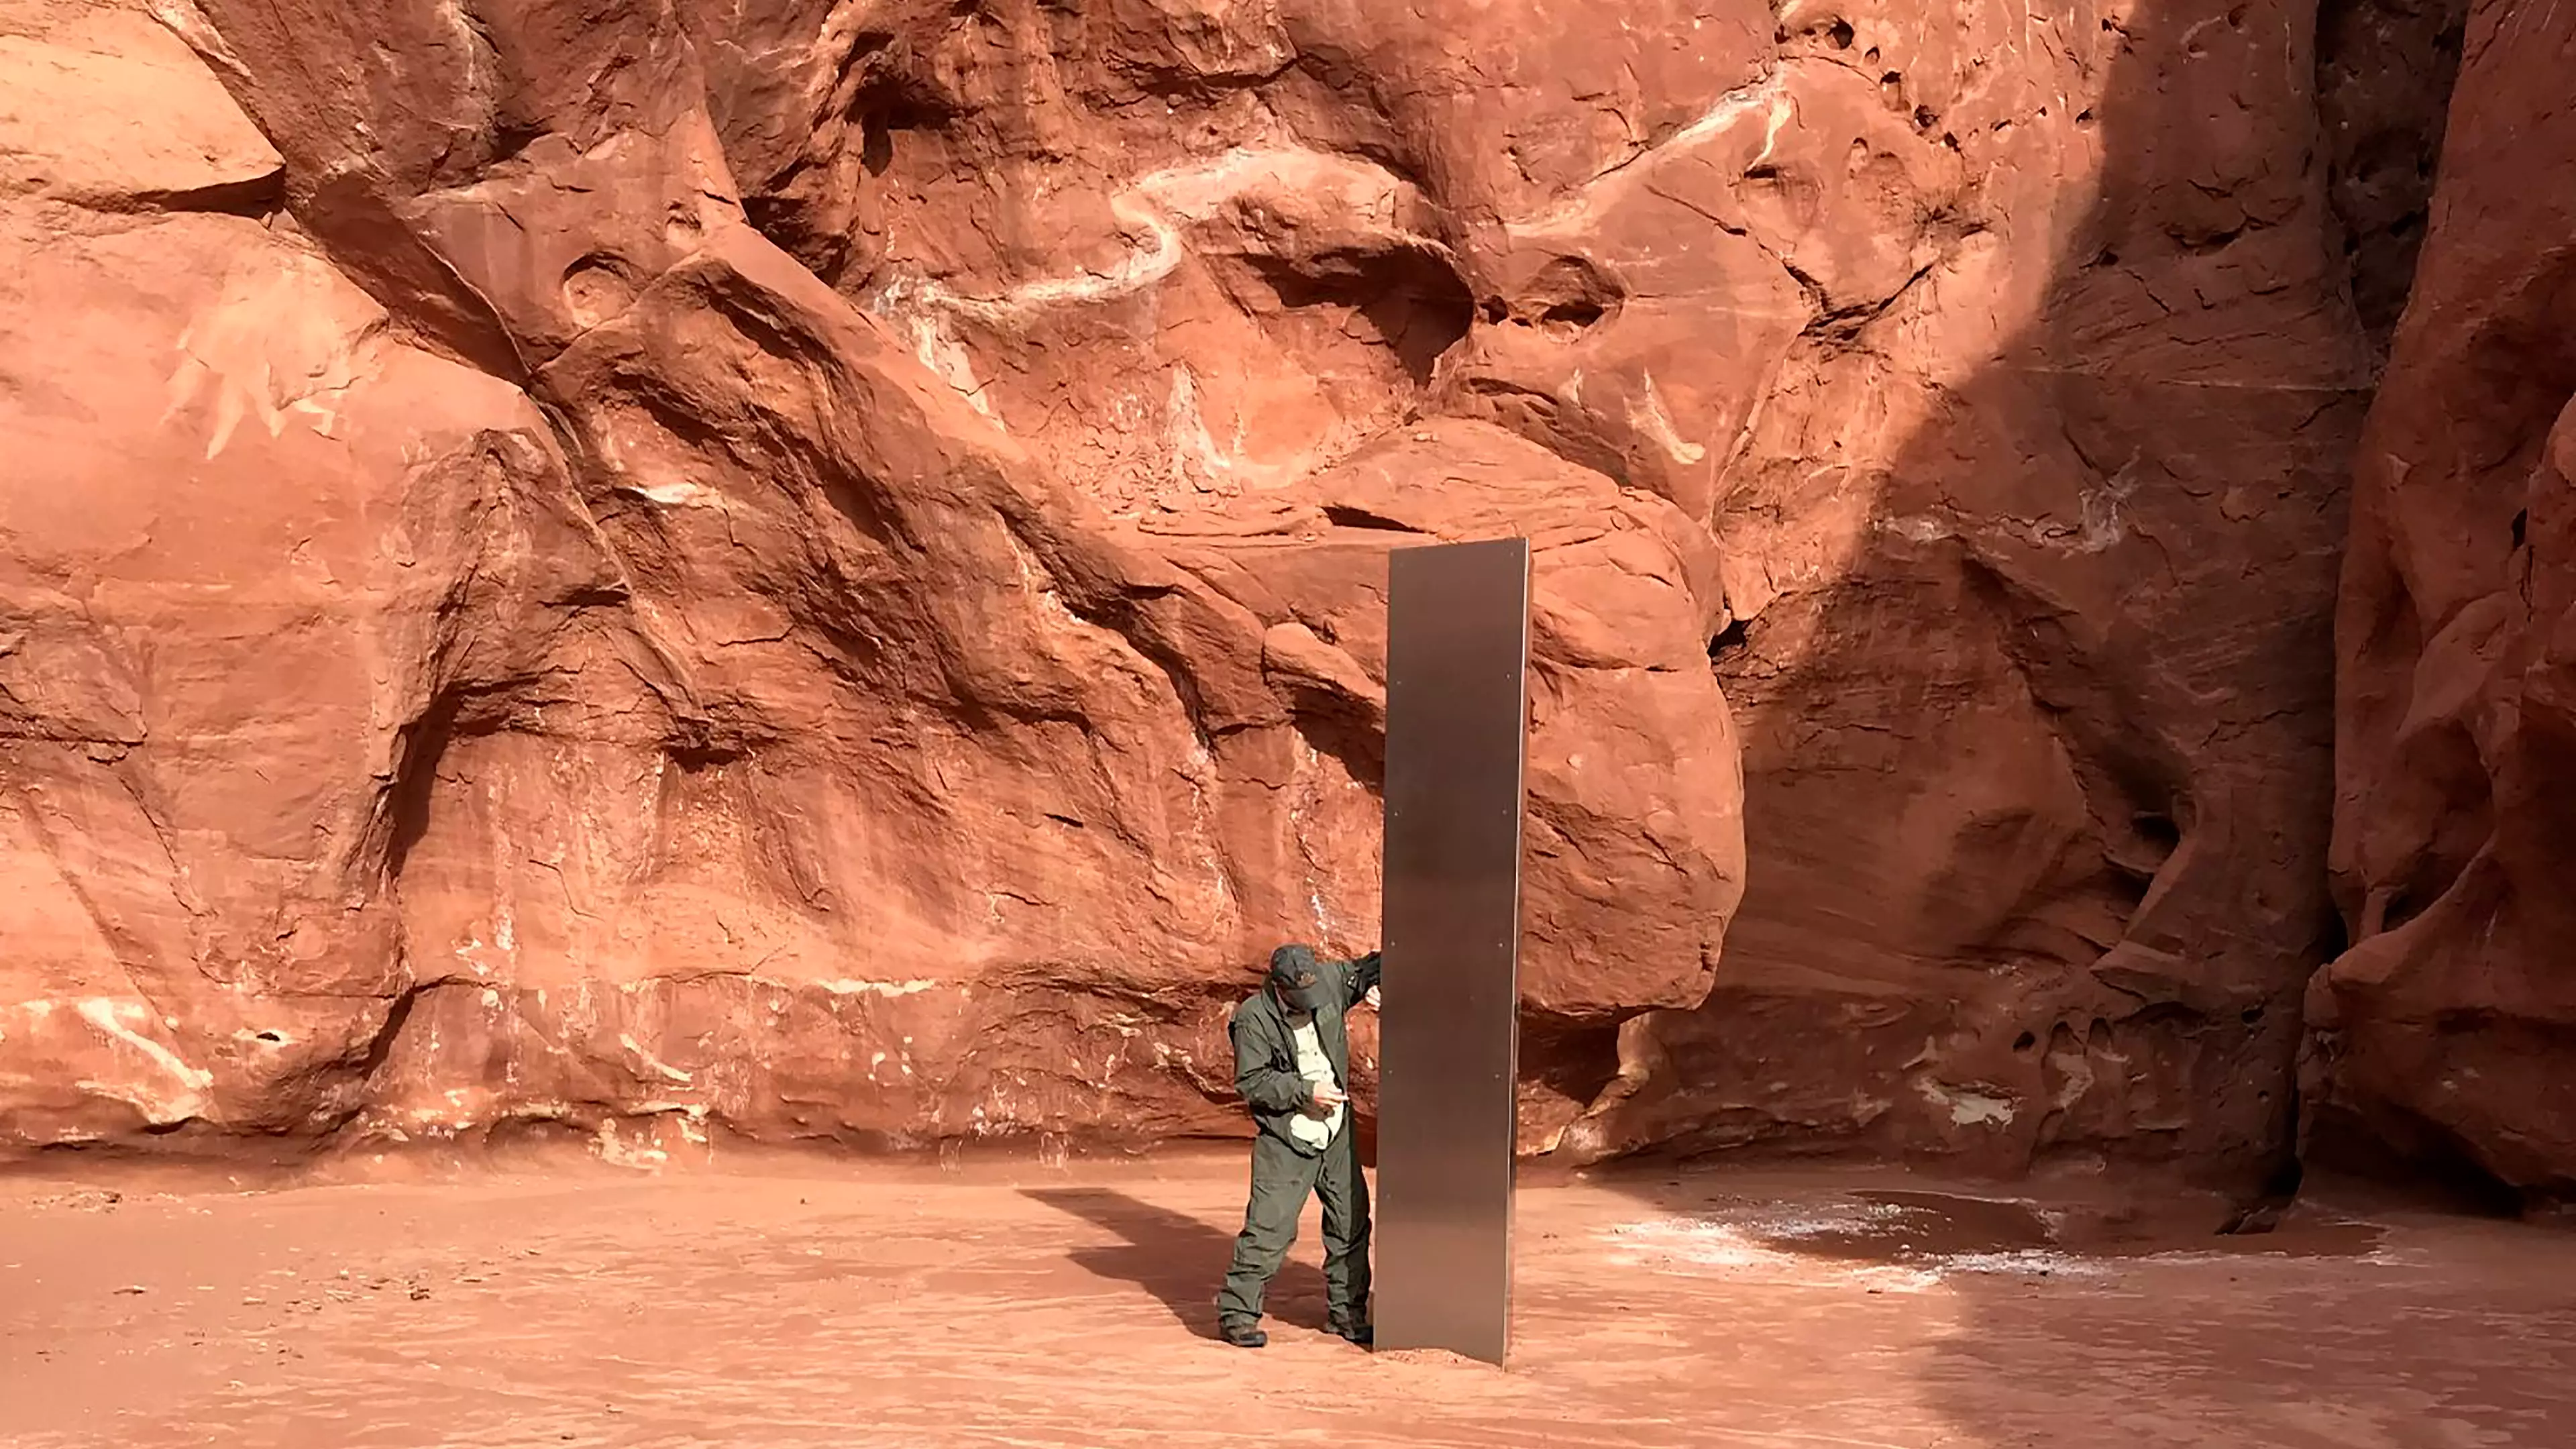 People Think Dead Artist Is Responsible For Monolith In Desert